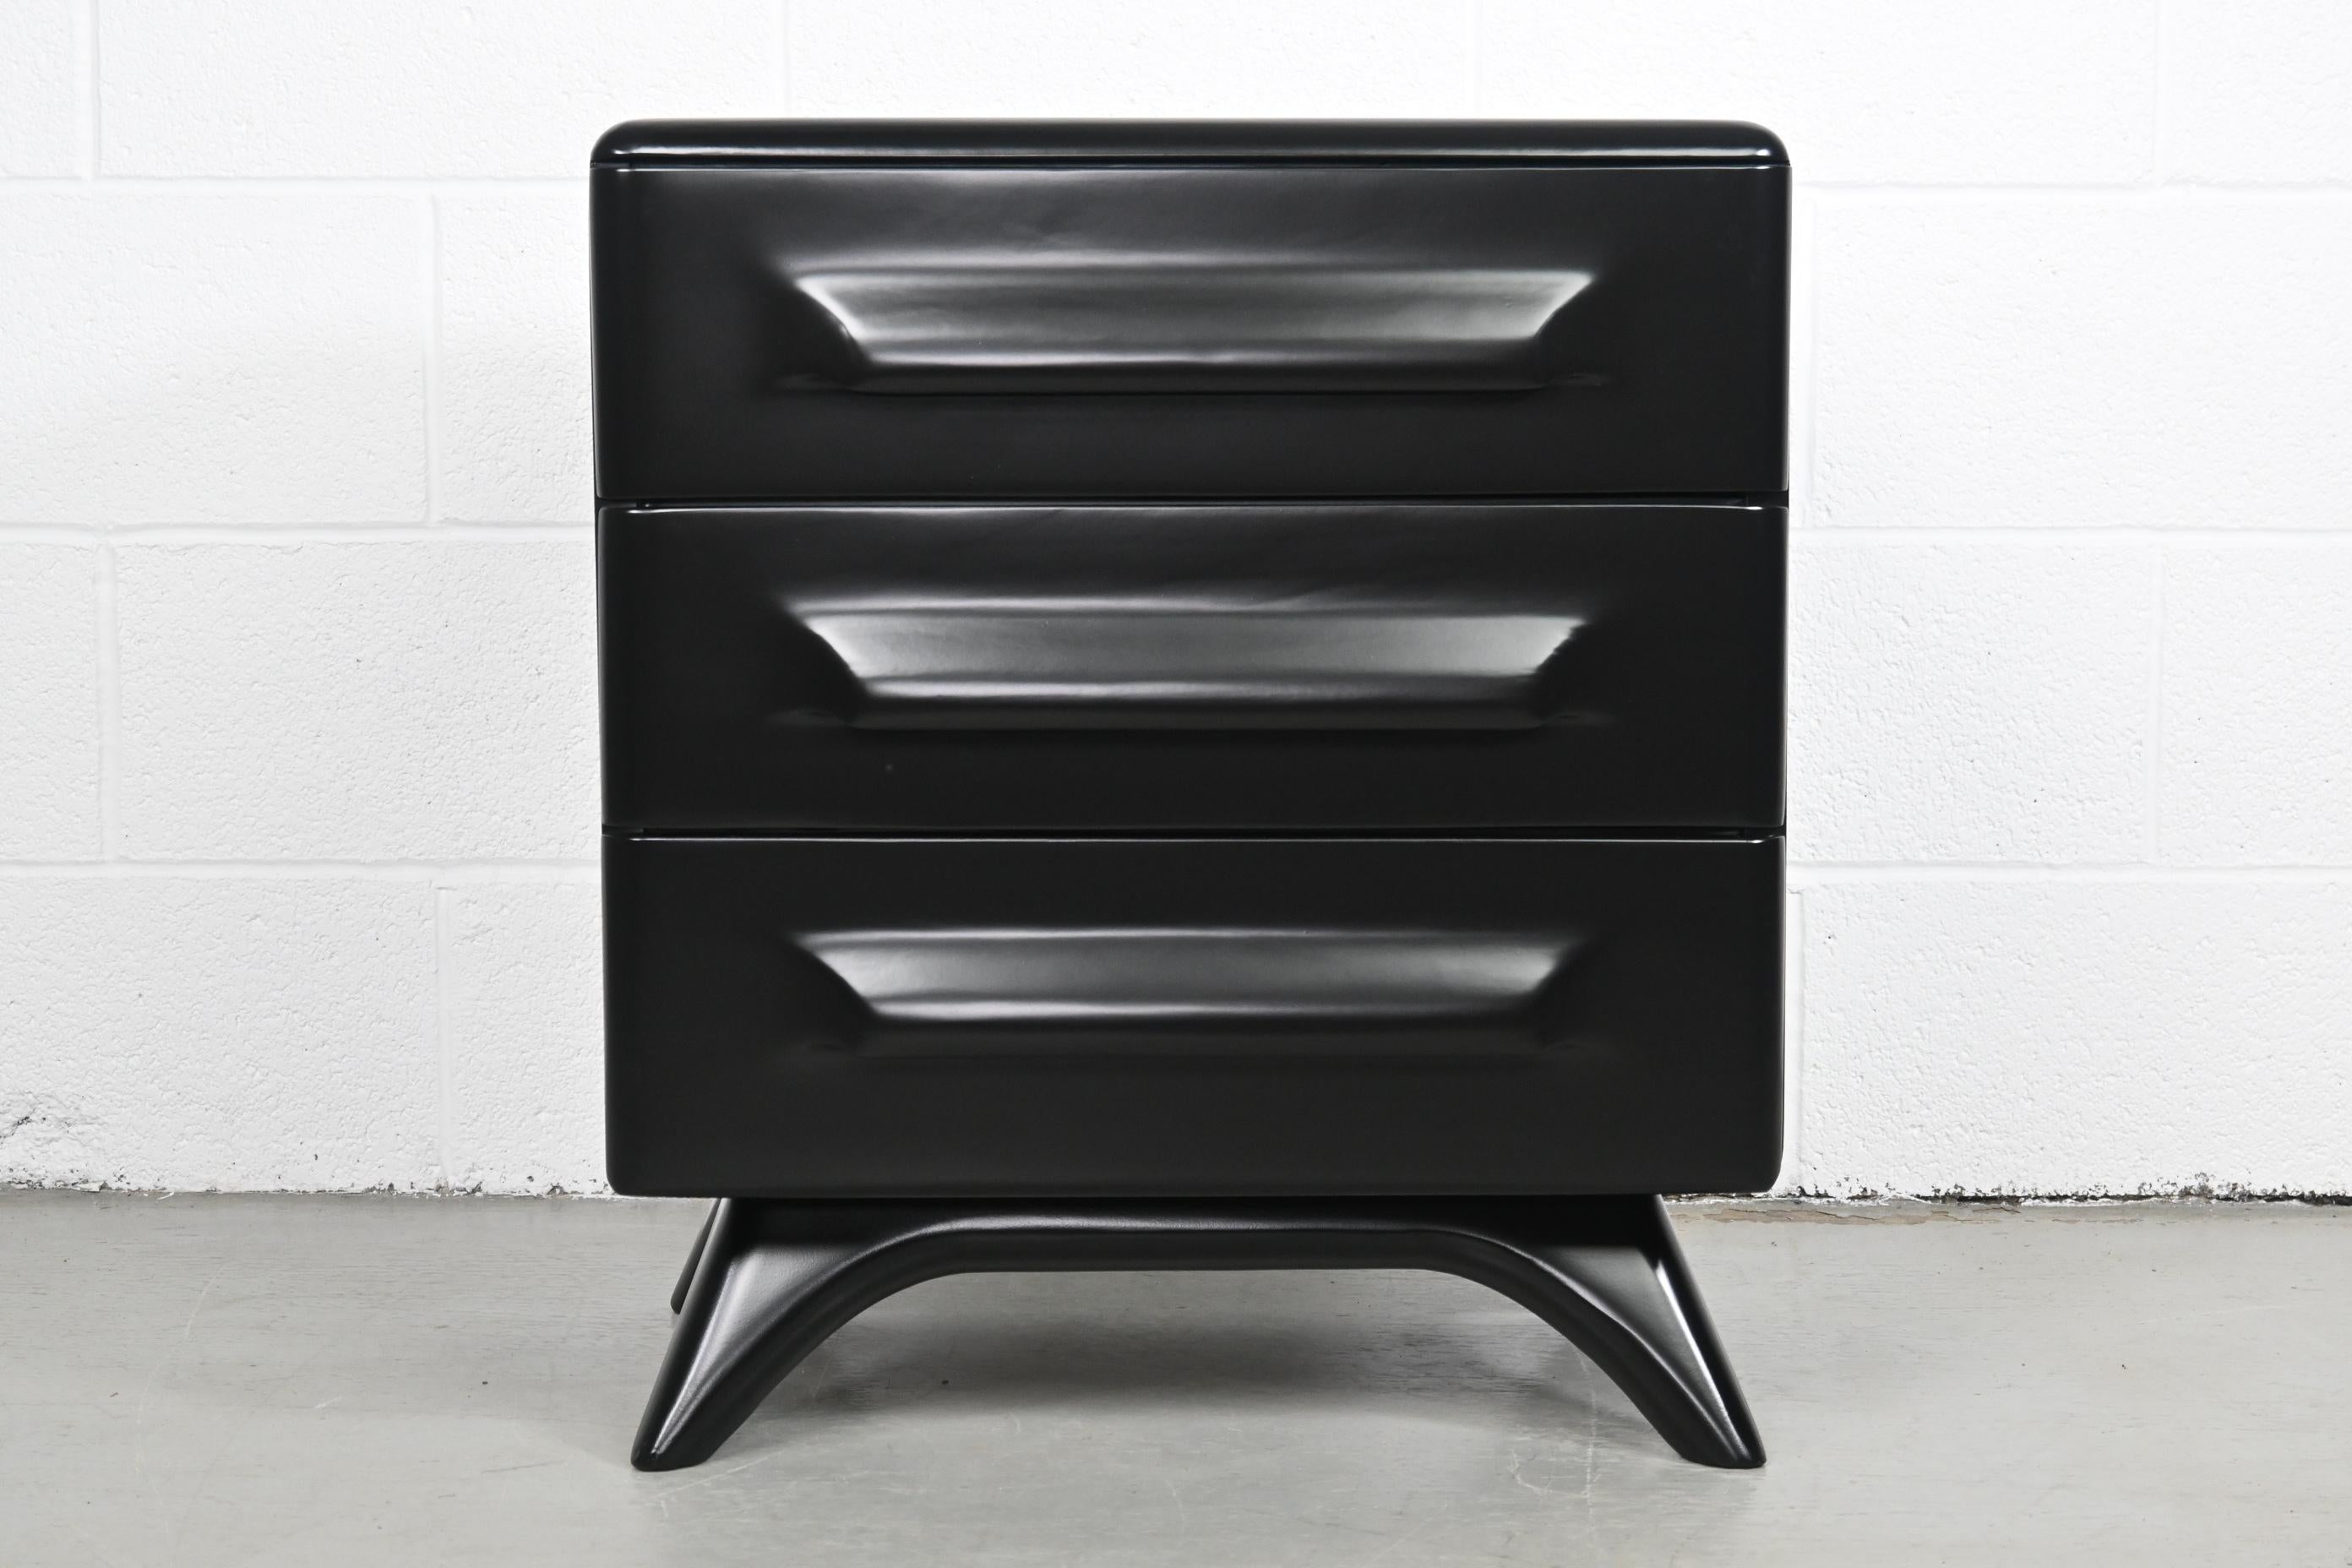 Franklin Shockey Mid Century Modern Sculpted Black Lacquered Maple Nightstand or End Table

Franklin Shockey, USA, 1950s.

Measures: 21.625 Wide x 15 Deep x 24.88 High.

Sculpted maple black lacquered nightstand with three drawers.

Professionally